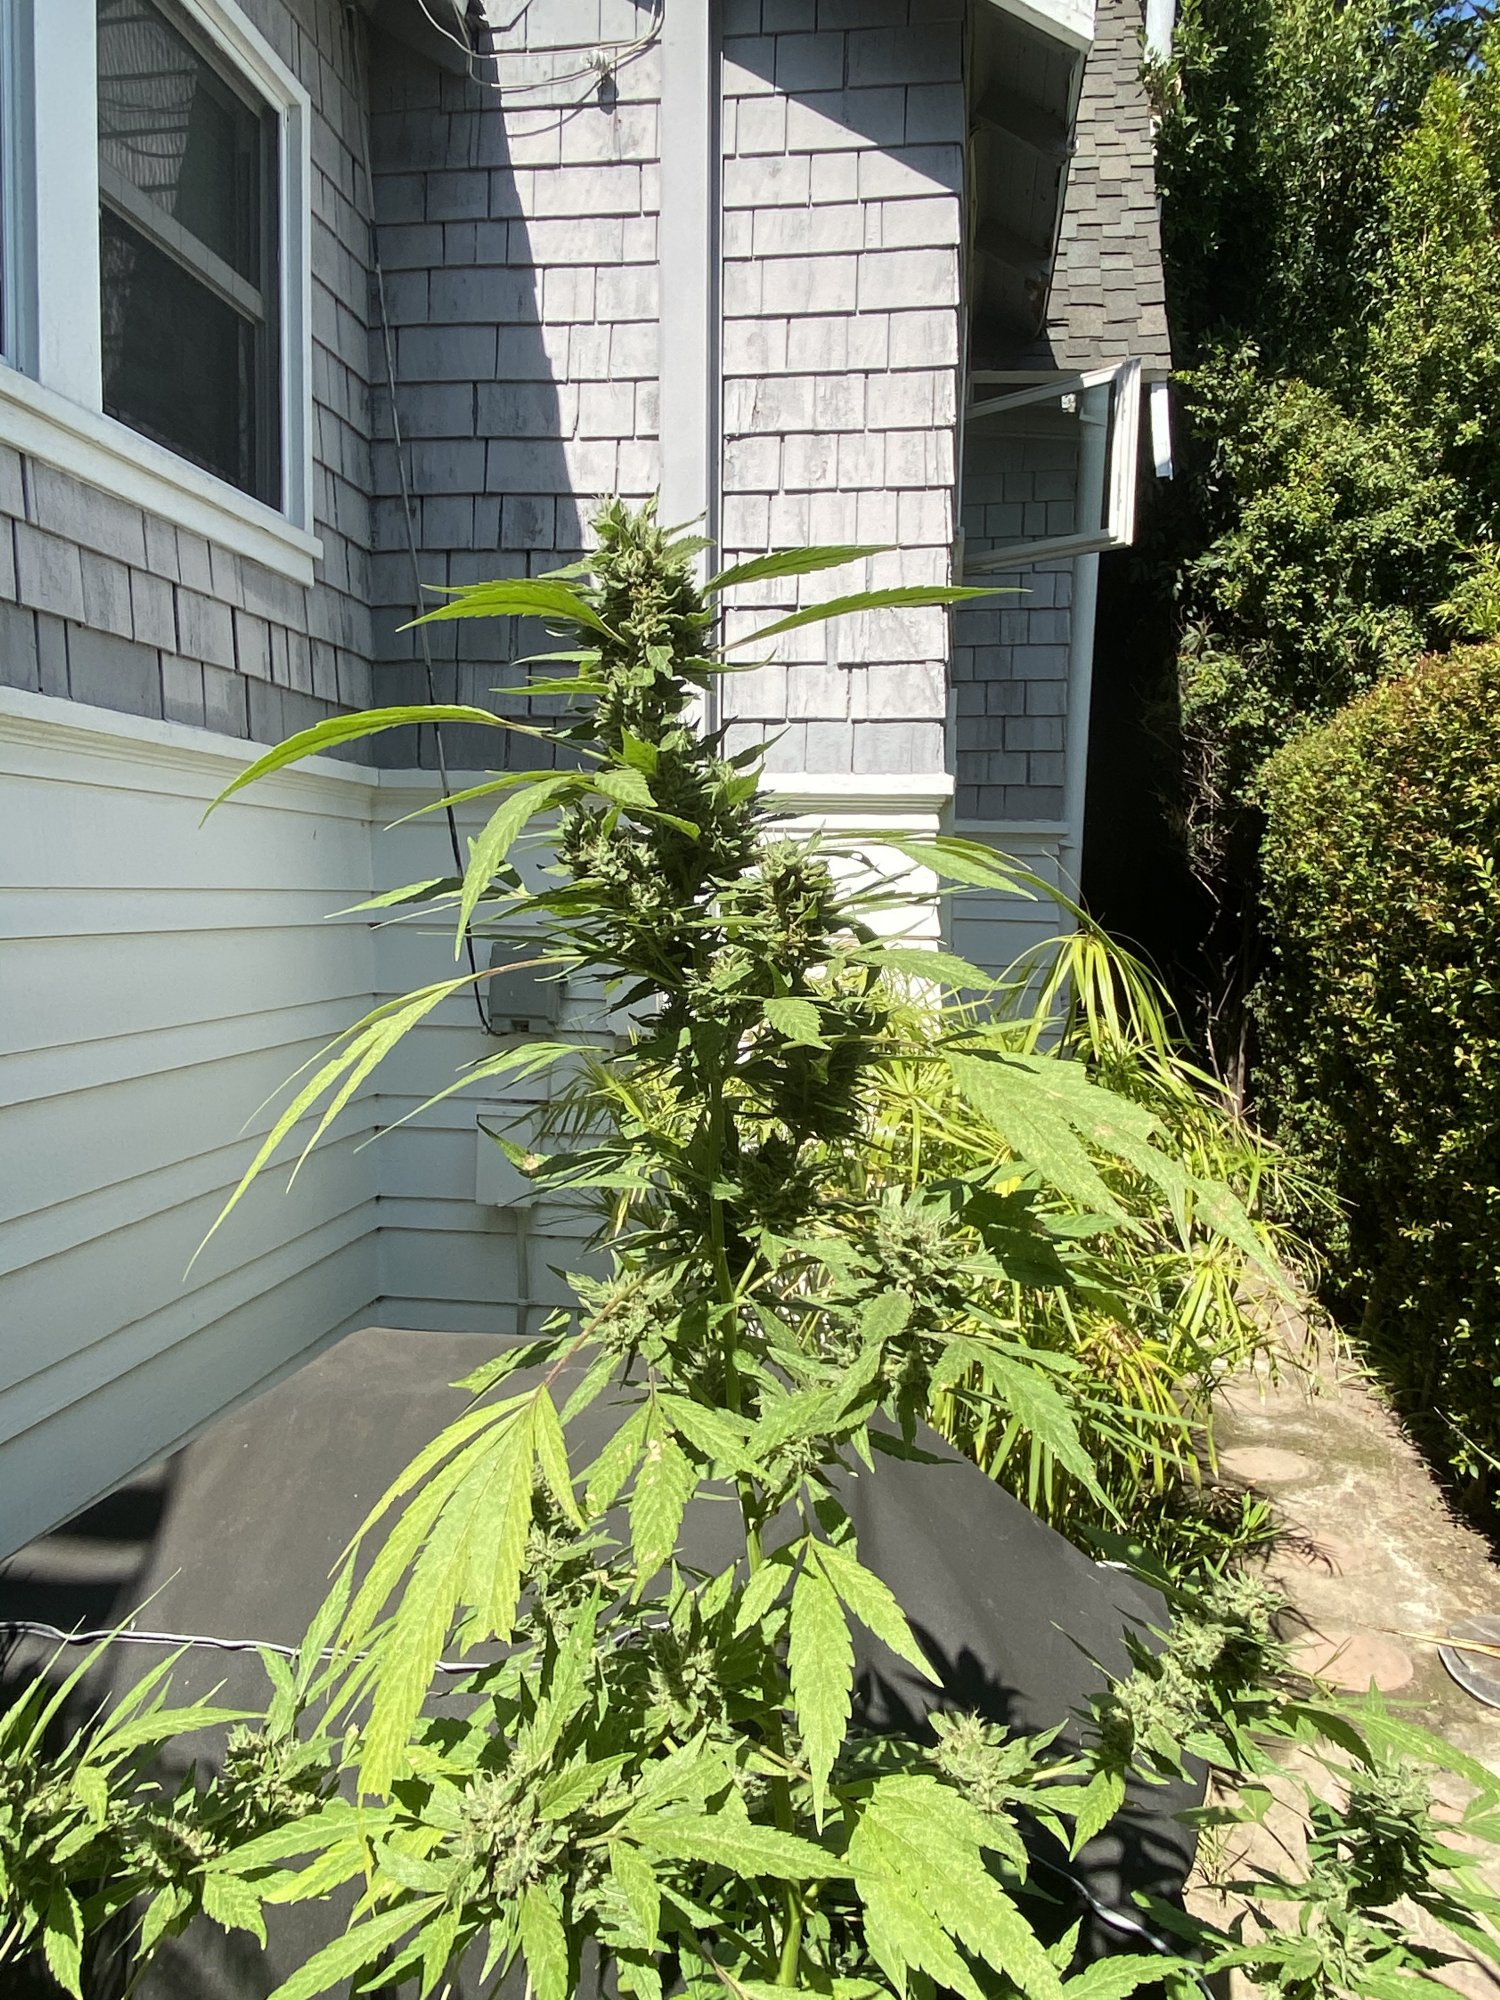 Leaning and possible nutrient deficiency 2